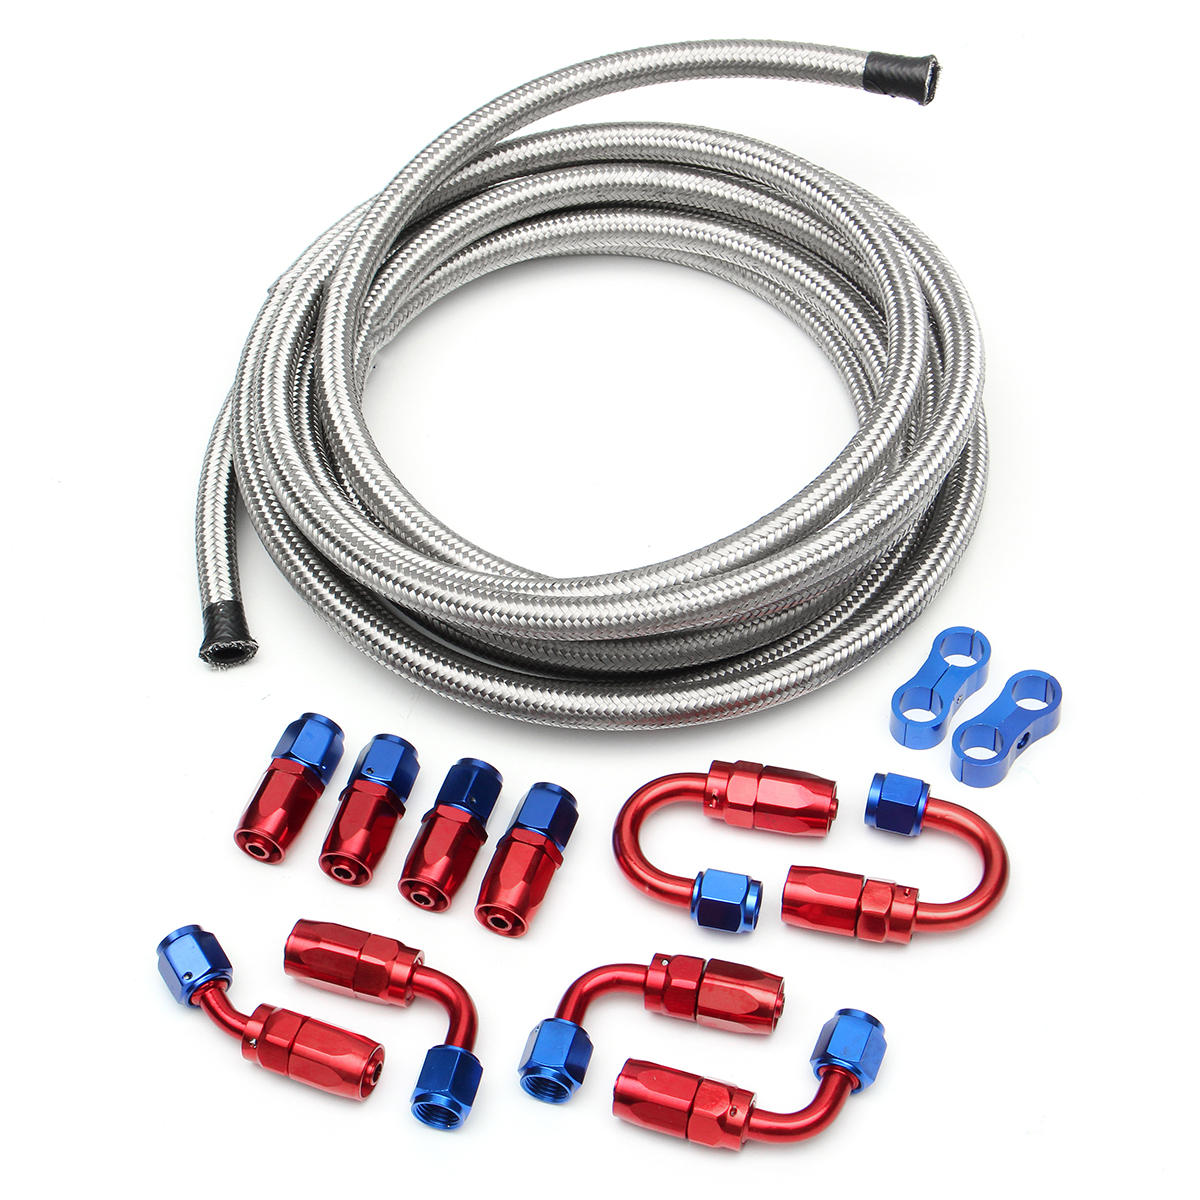 Image of 5M AN6 Braided Oil Fuel Line Hose With Fitting End Adapter Kit Set Stainless Steel